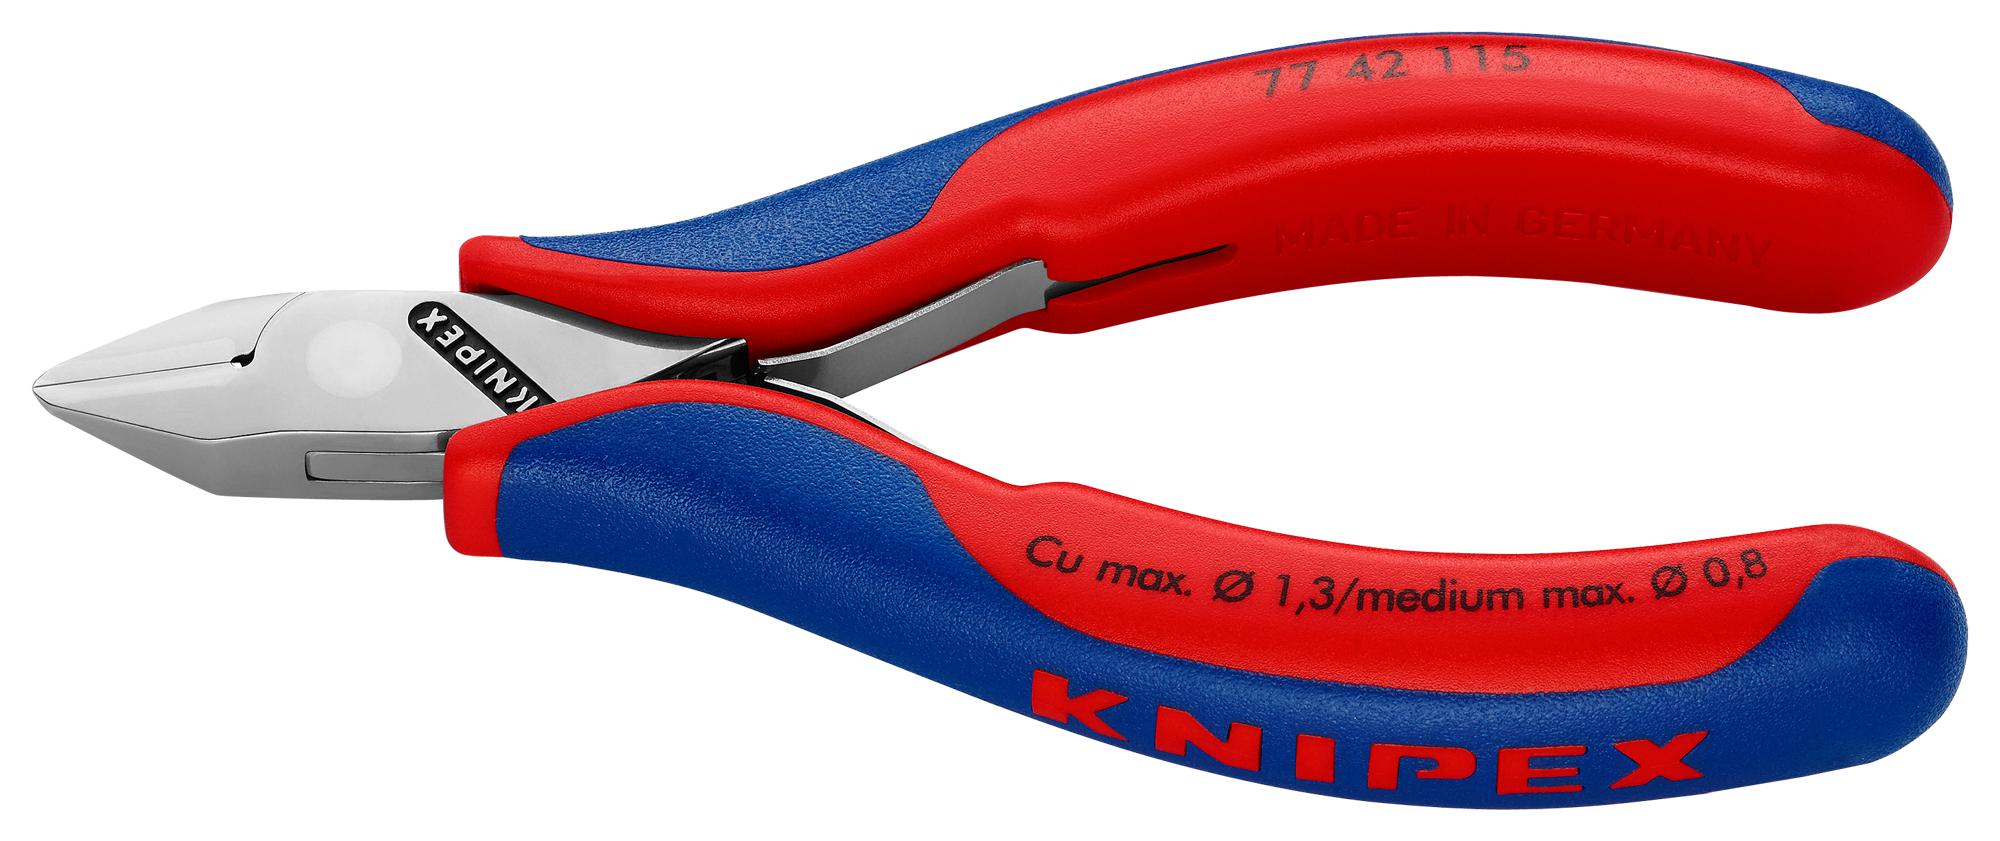 7742115 CUTTER, RED HANDLES KNIPEX